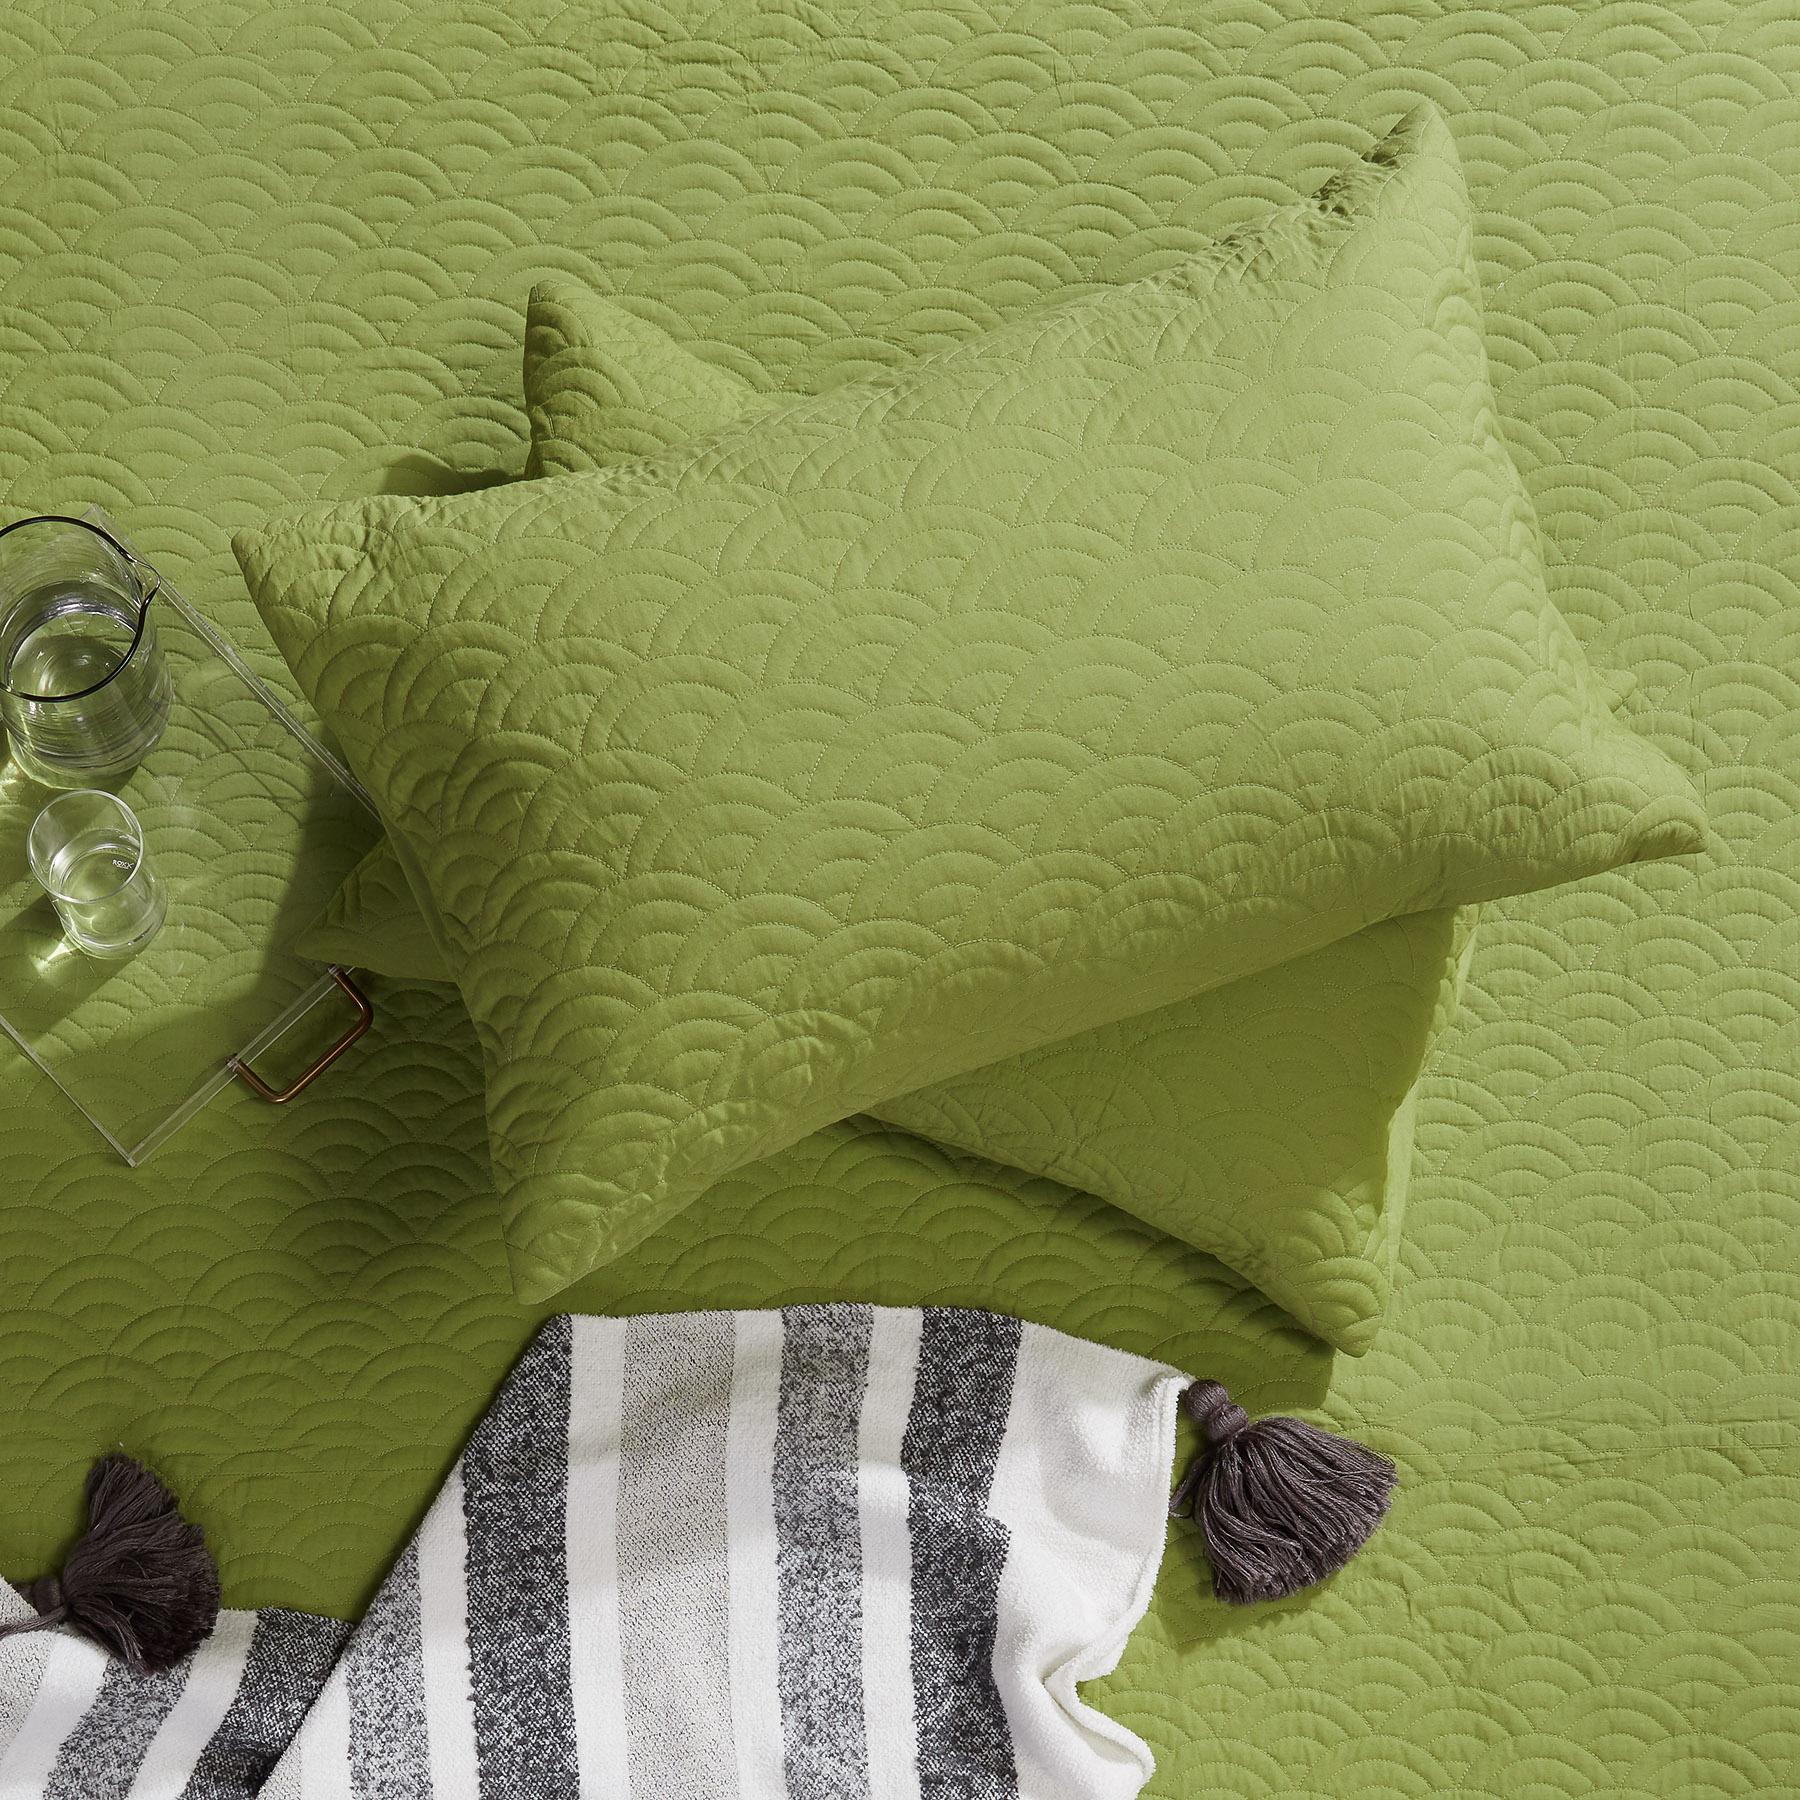 Fern Scallop Quilted Pillow Cases